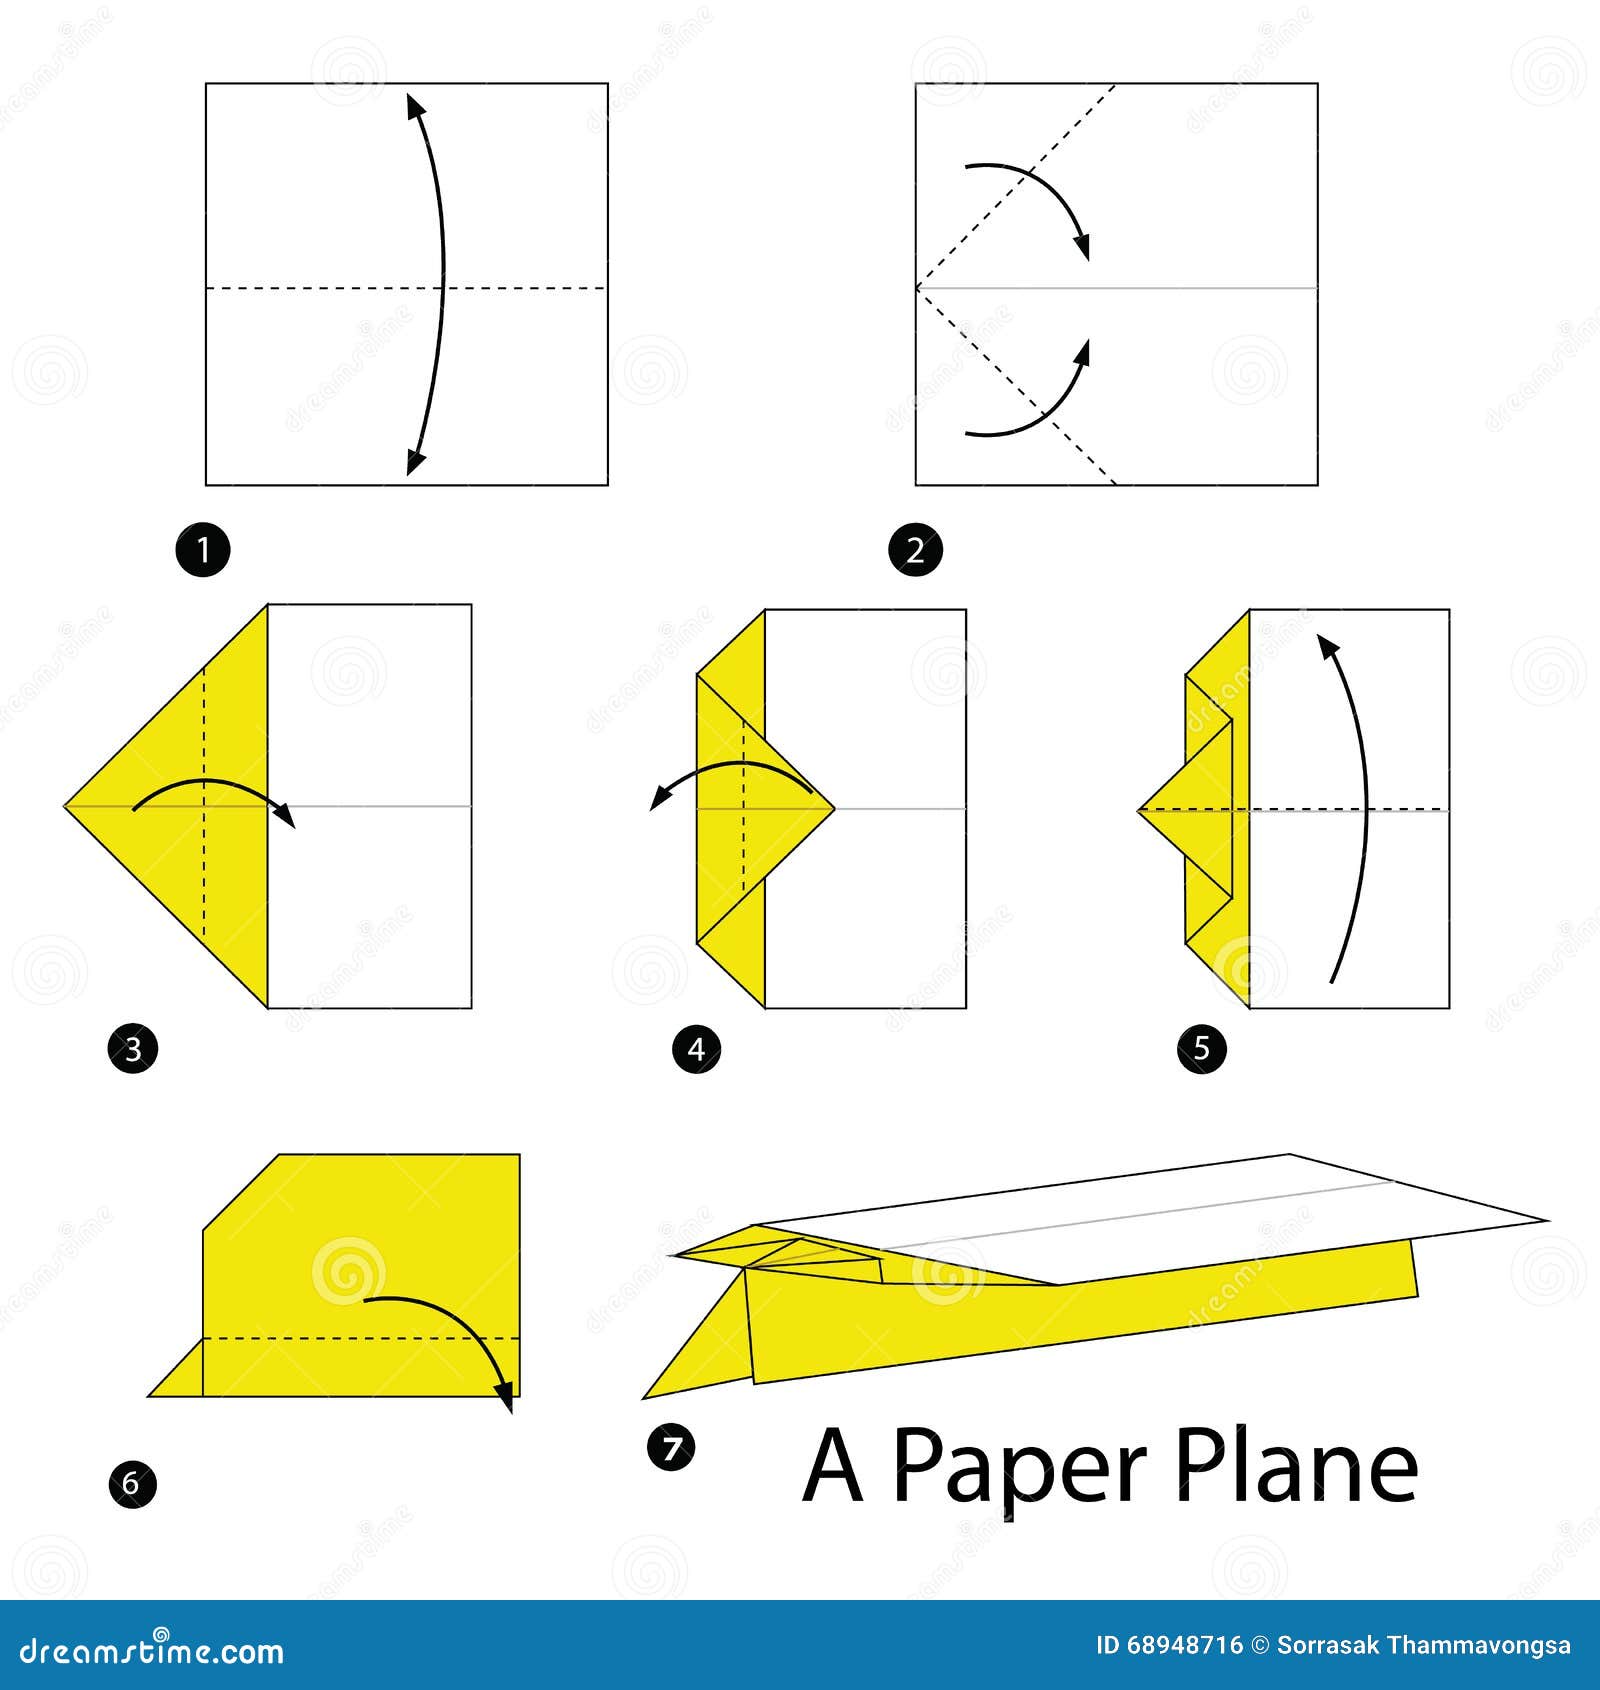 How to make a paper airplane step by step   youtube